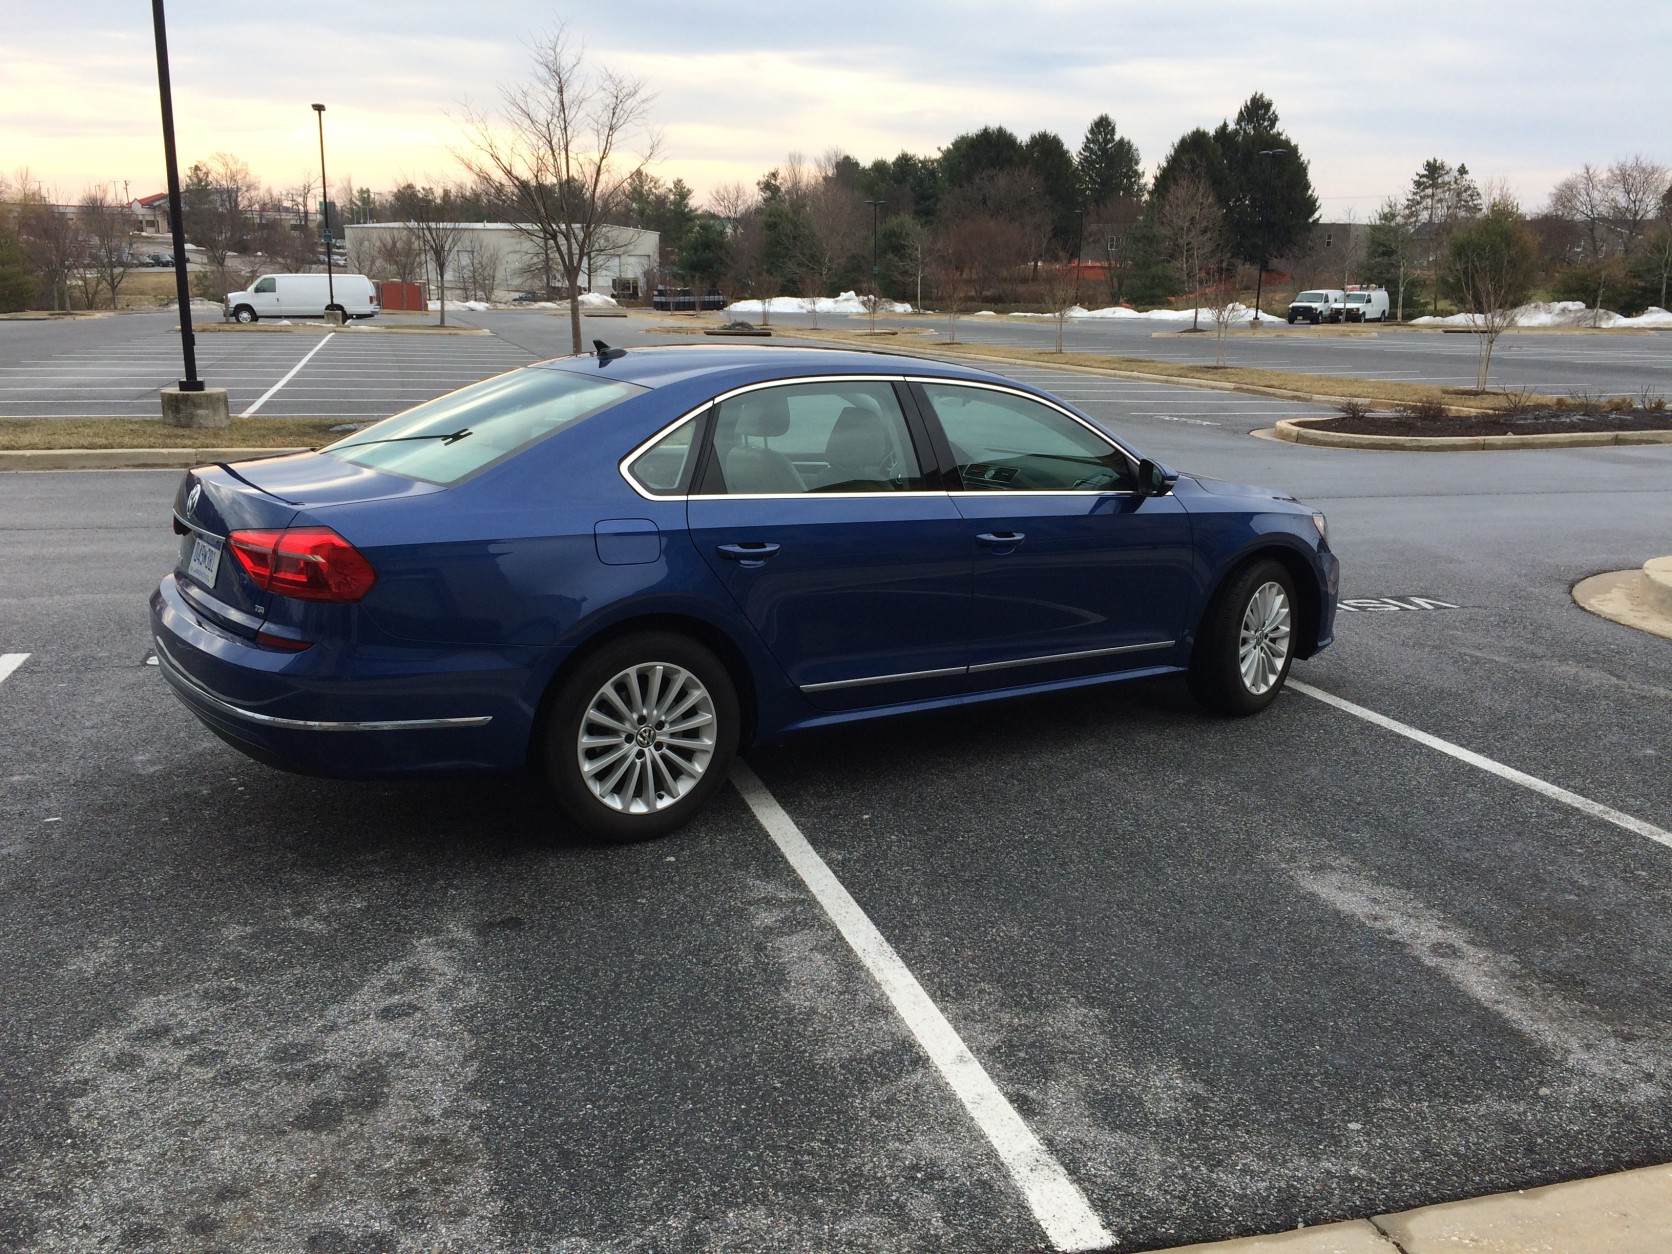 The 2016 Volkswagen Passat is a roomy option with plenty of space to spread out for this class size. (WTOP/Mike Parris)